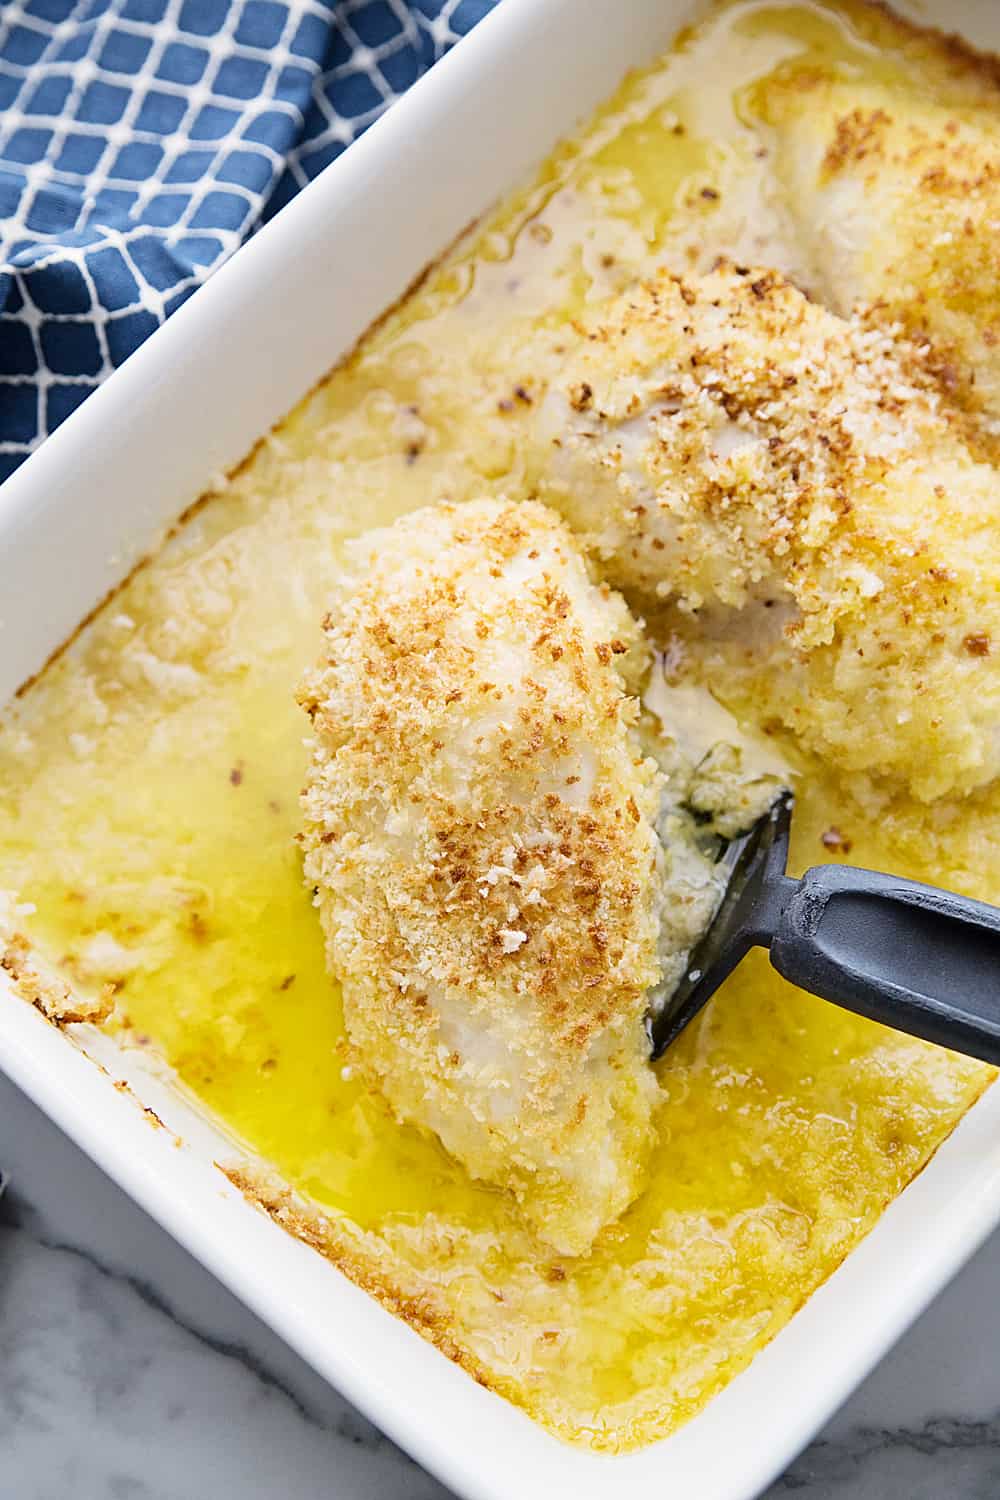 Easy Swiss Cheese Chicken - This Swiss cheese chicken recipe is an easy weeknight meal! Chicken breasts are covered in a creamy sauce and cheese and topped with crispy bread crumbs.